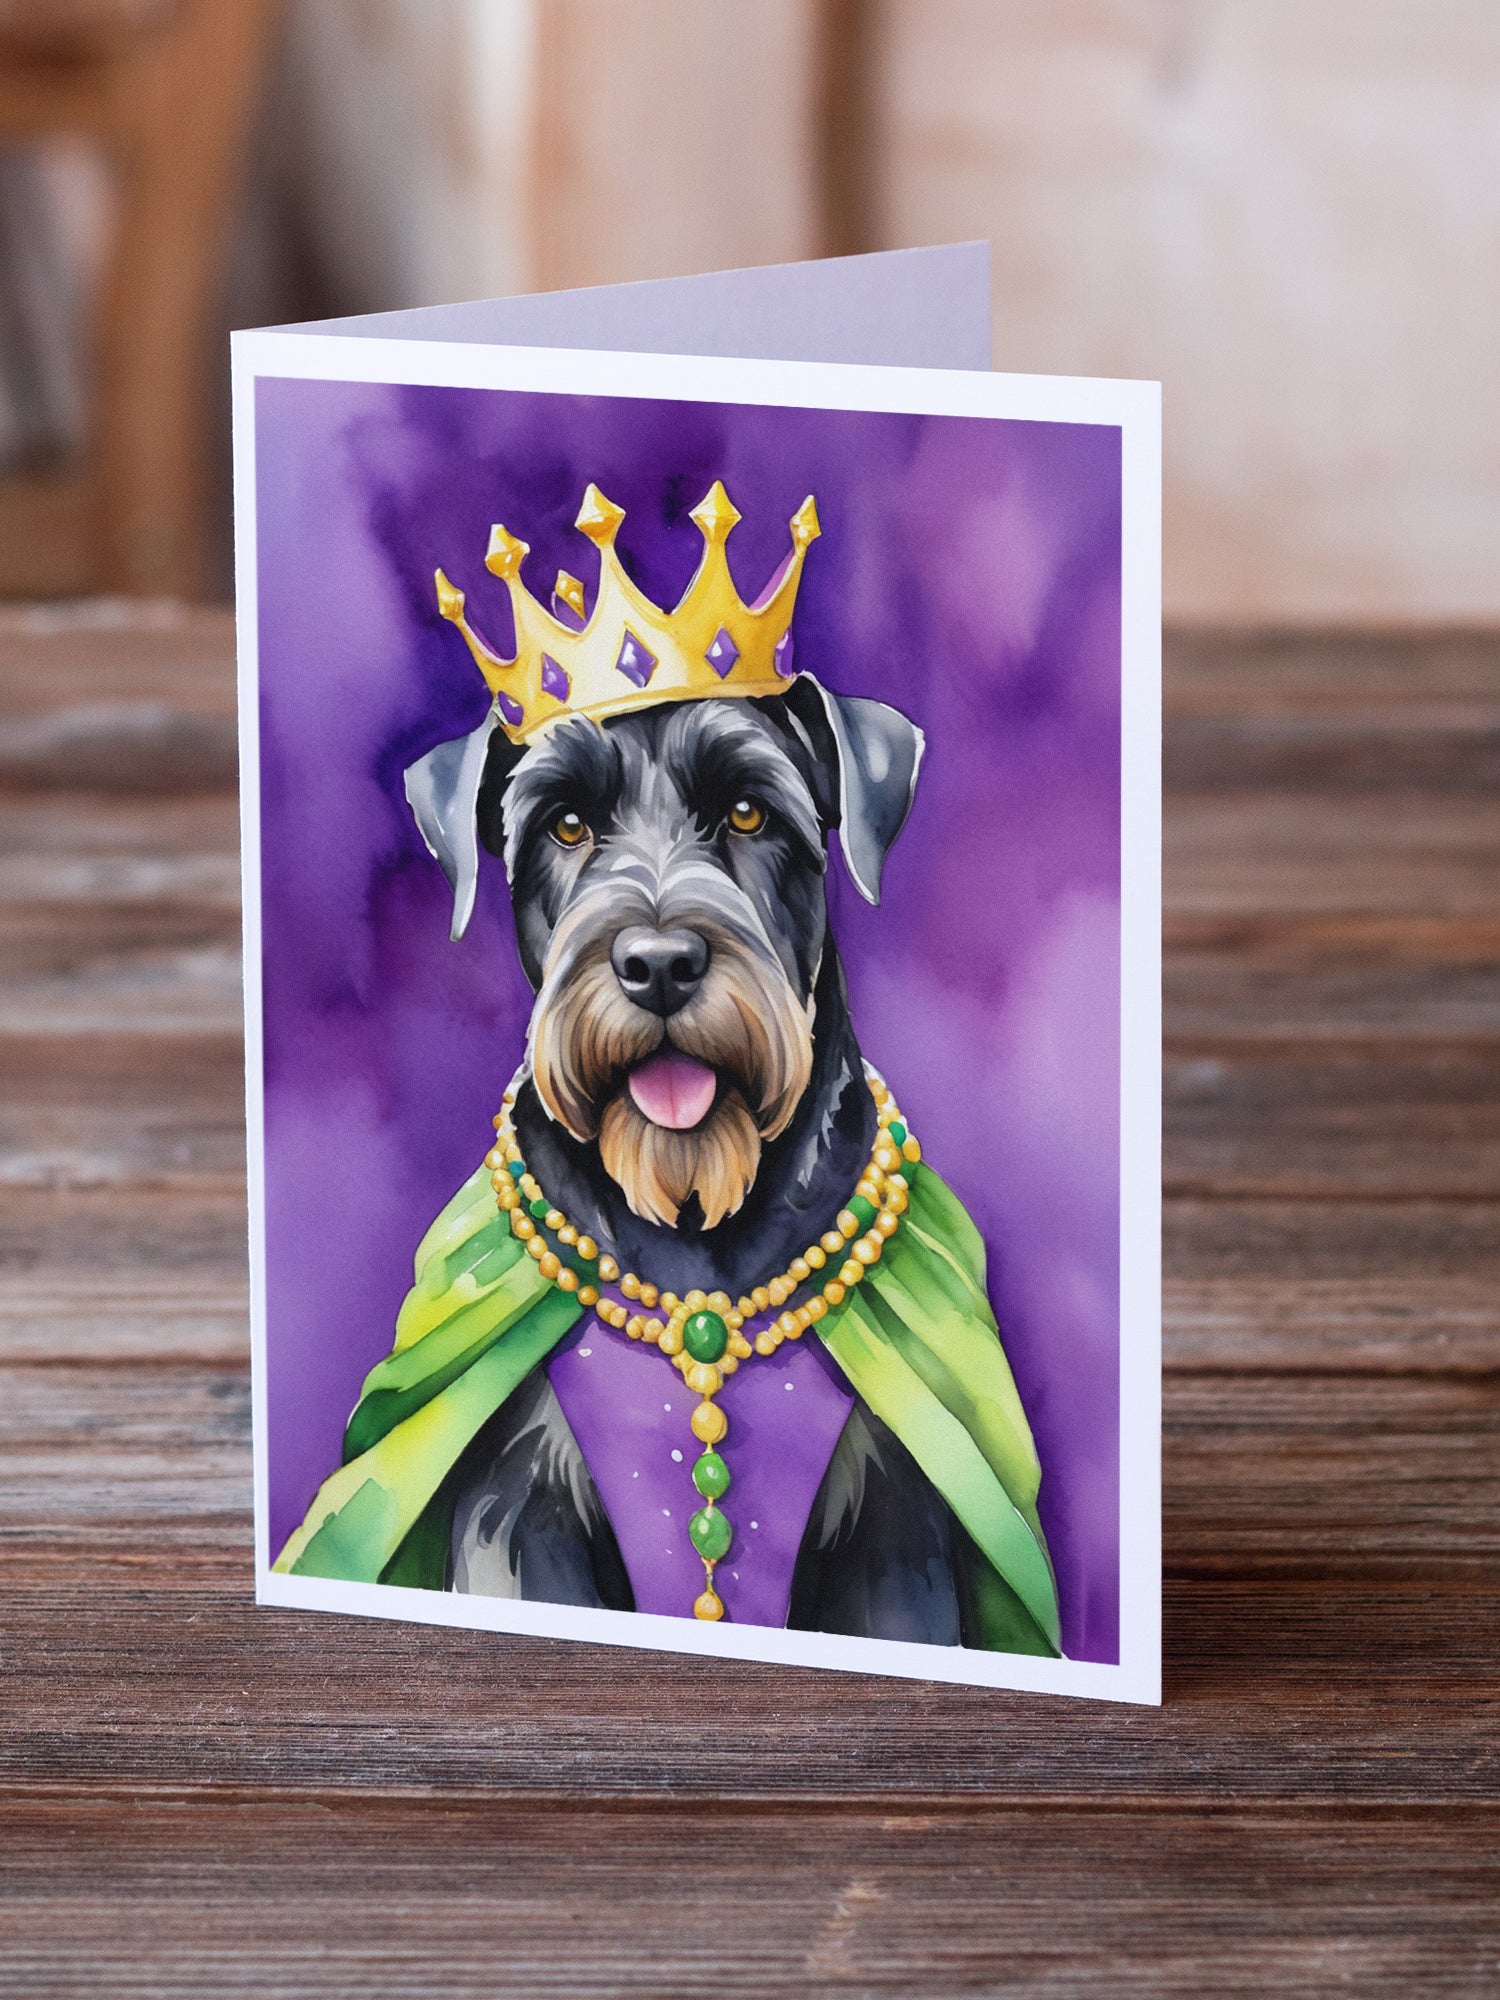 Buy this Giant Schnauzer King of Mardi Gras Greeting Cards Pack of 8